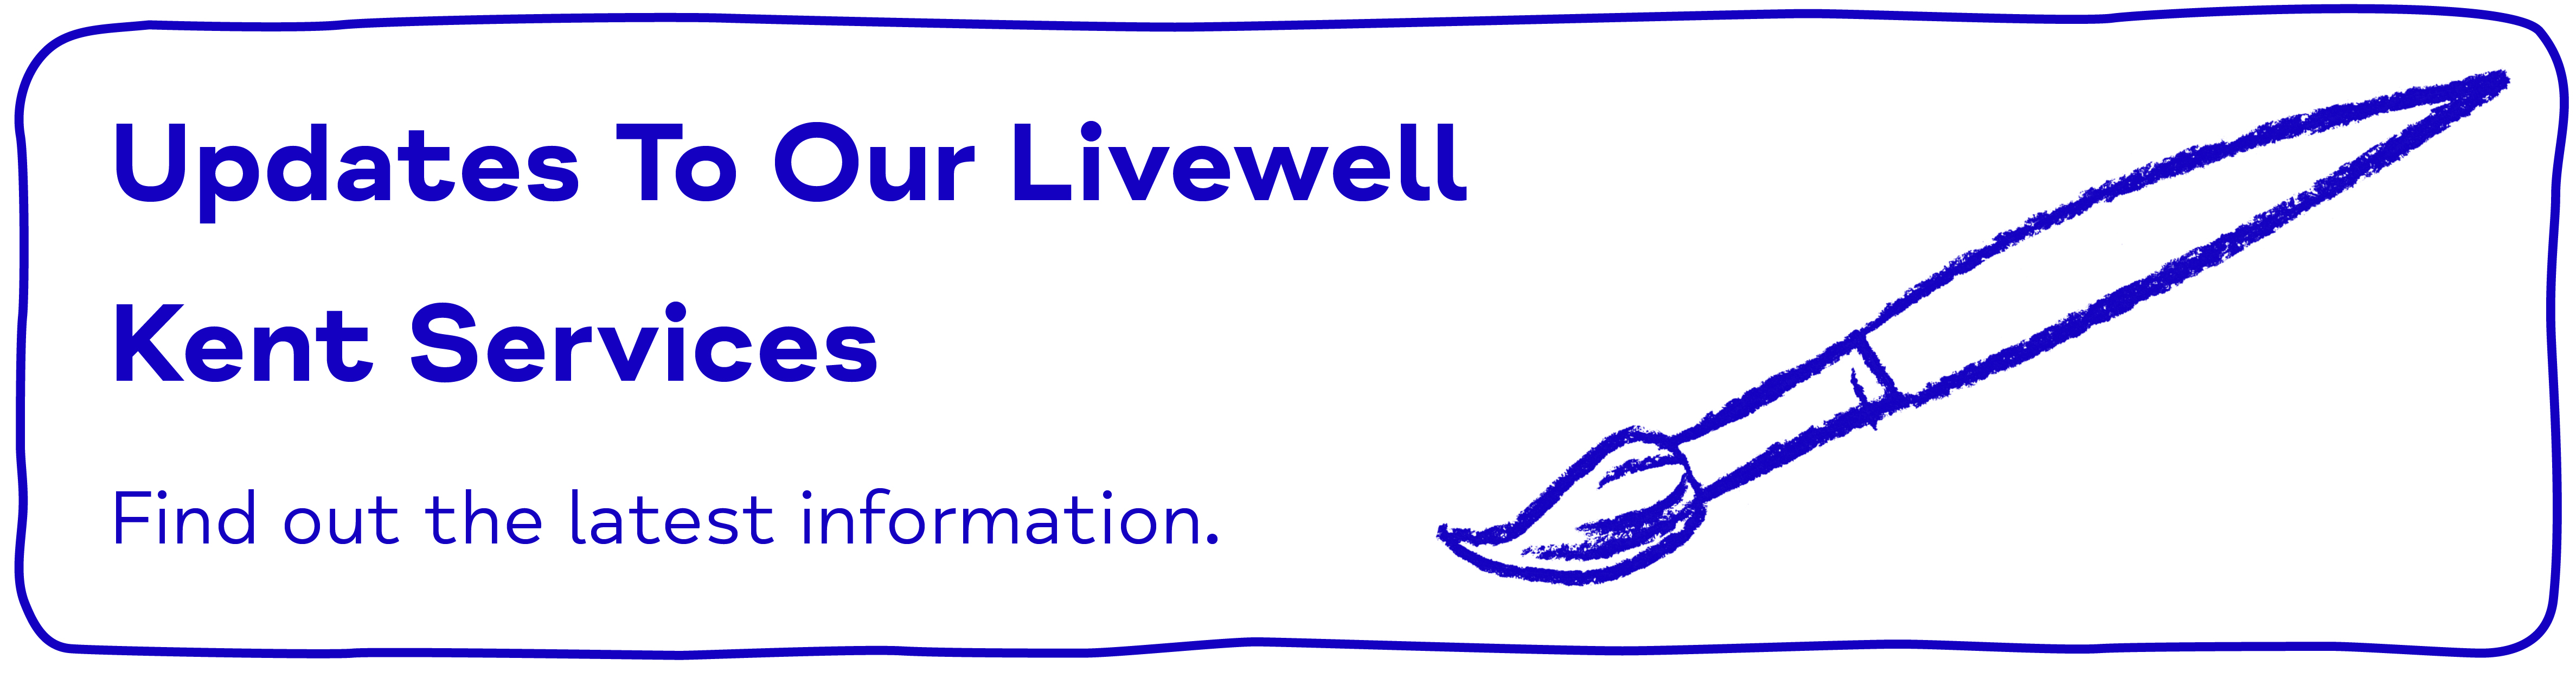 Updates To Our Livewell  Kent Services Find out the latest information.